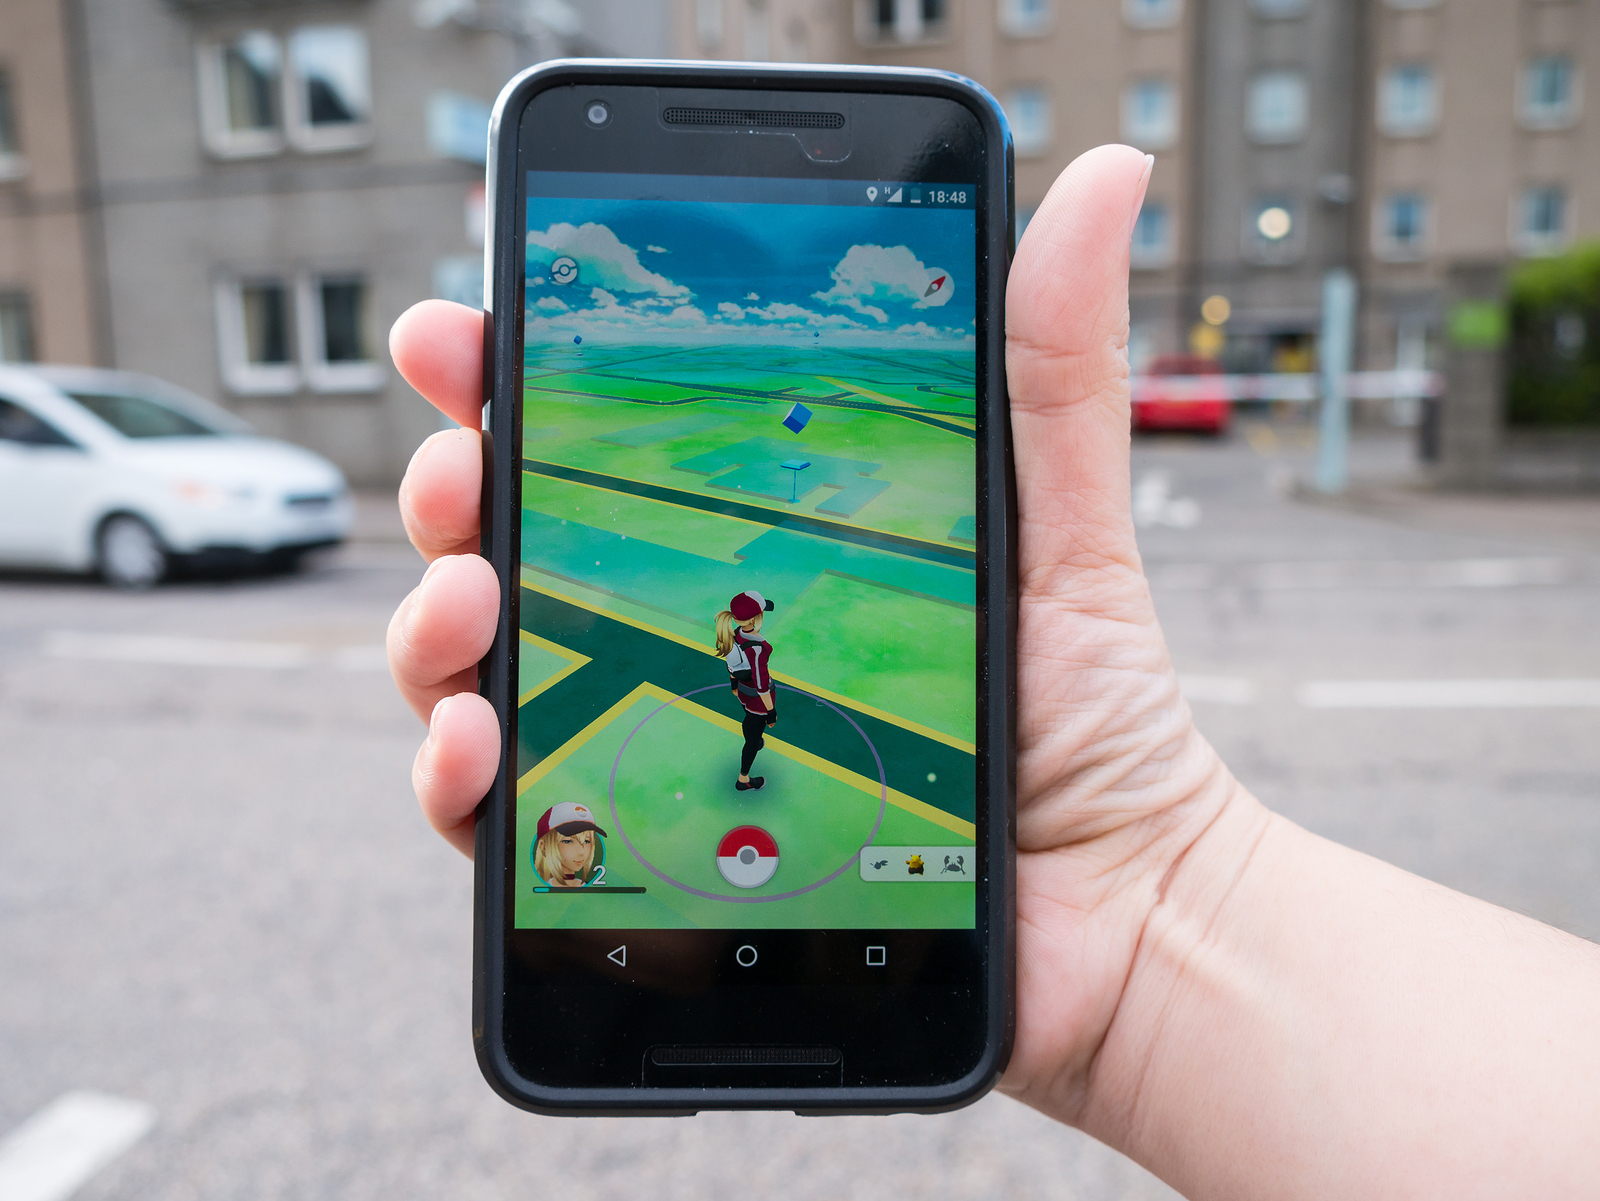 Fake Pokemon Go Apps Planted in Google Play